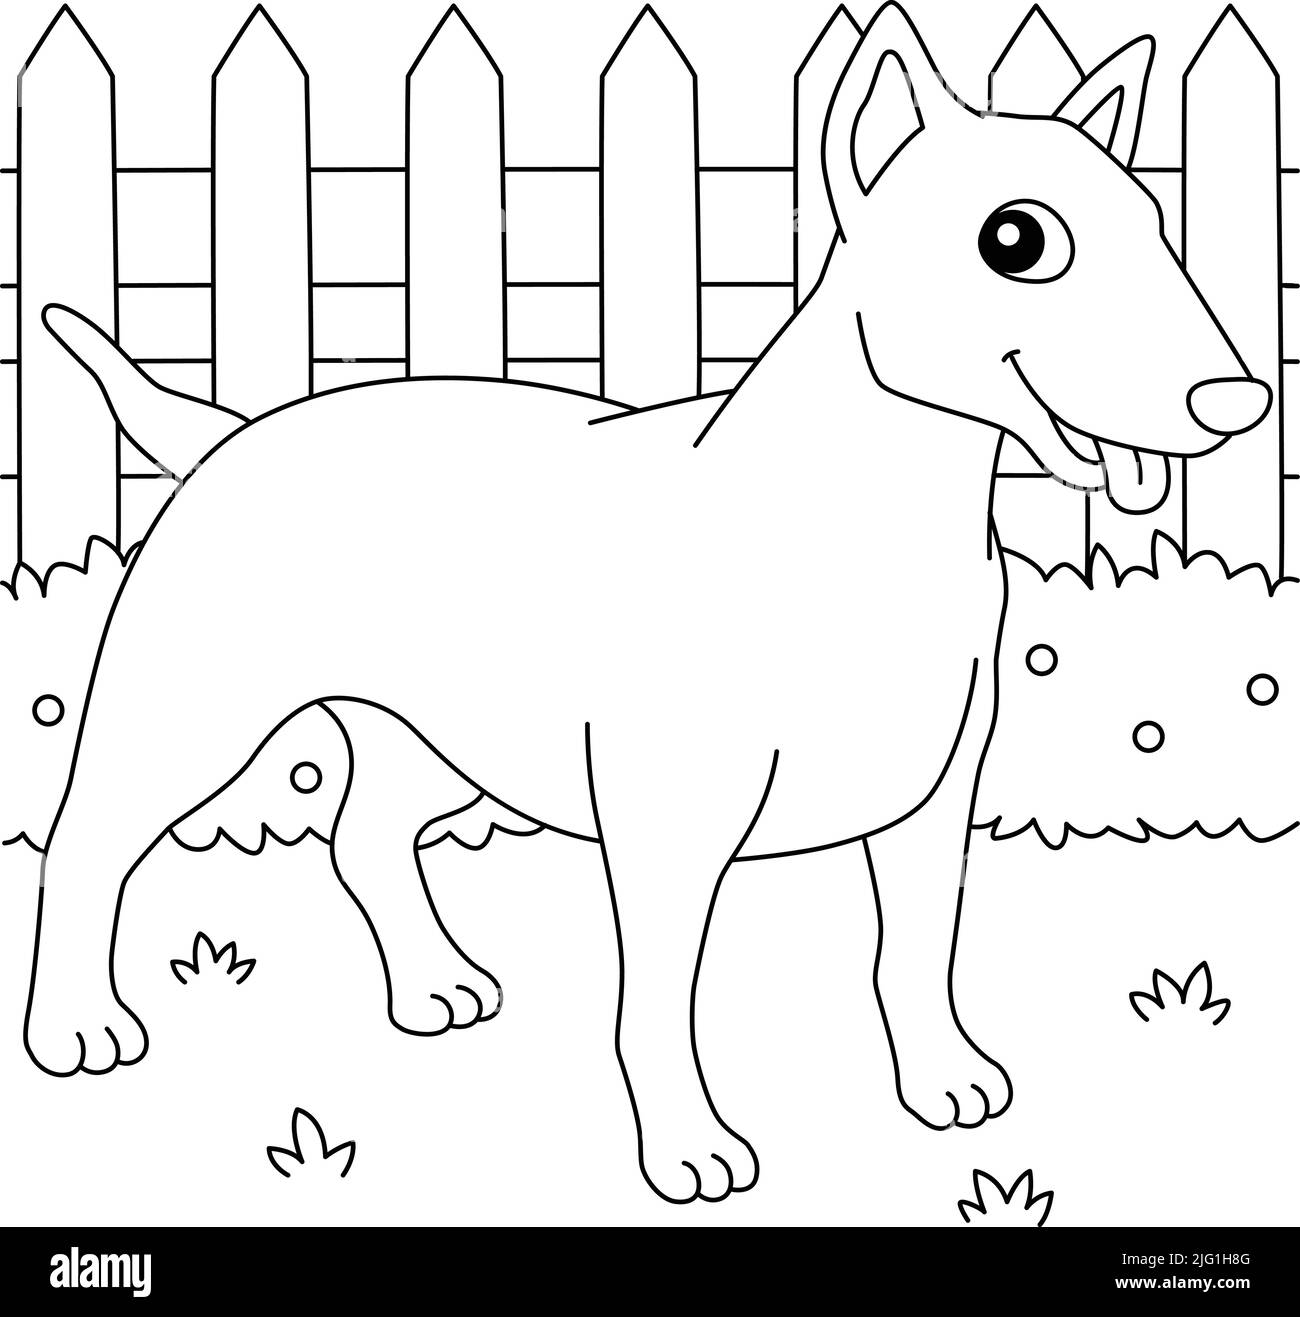 American Pit Bull Terrier Dog Coloring Page  Stock Vector